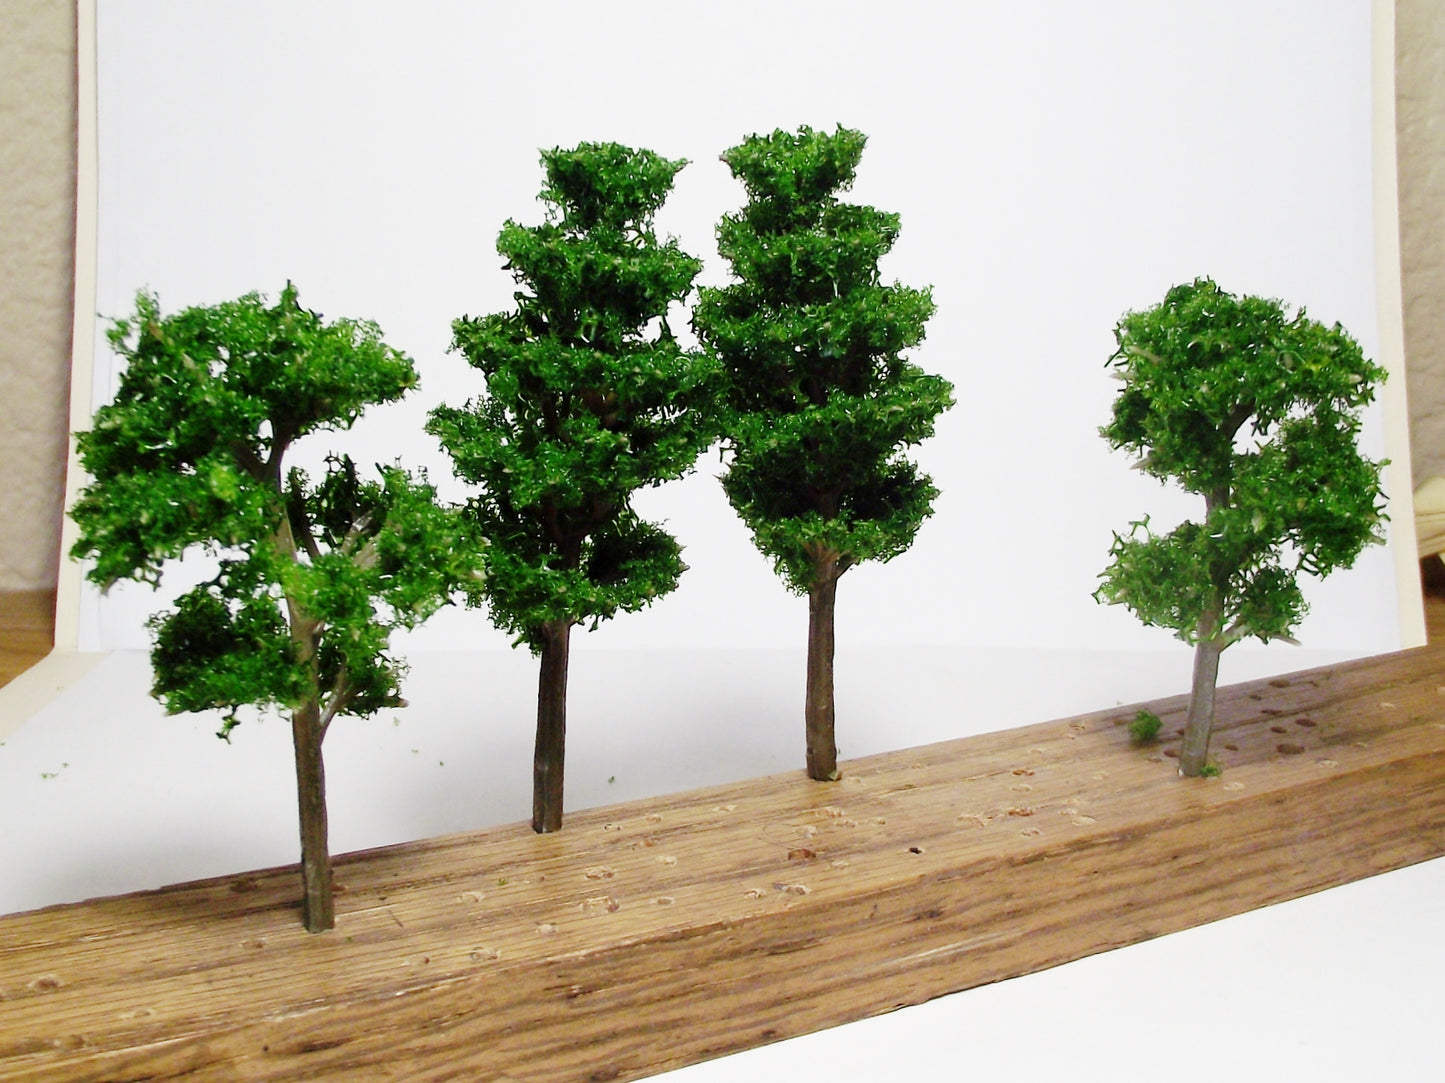 New Multi Scale Model Tree Scenery 10 Pieces Green Deciduous Trees in 2 Sizes 3 9/16" & 2 3/4"